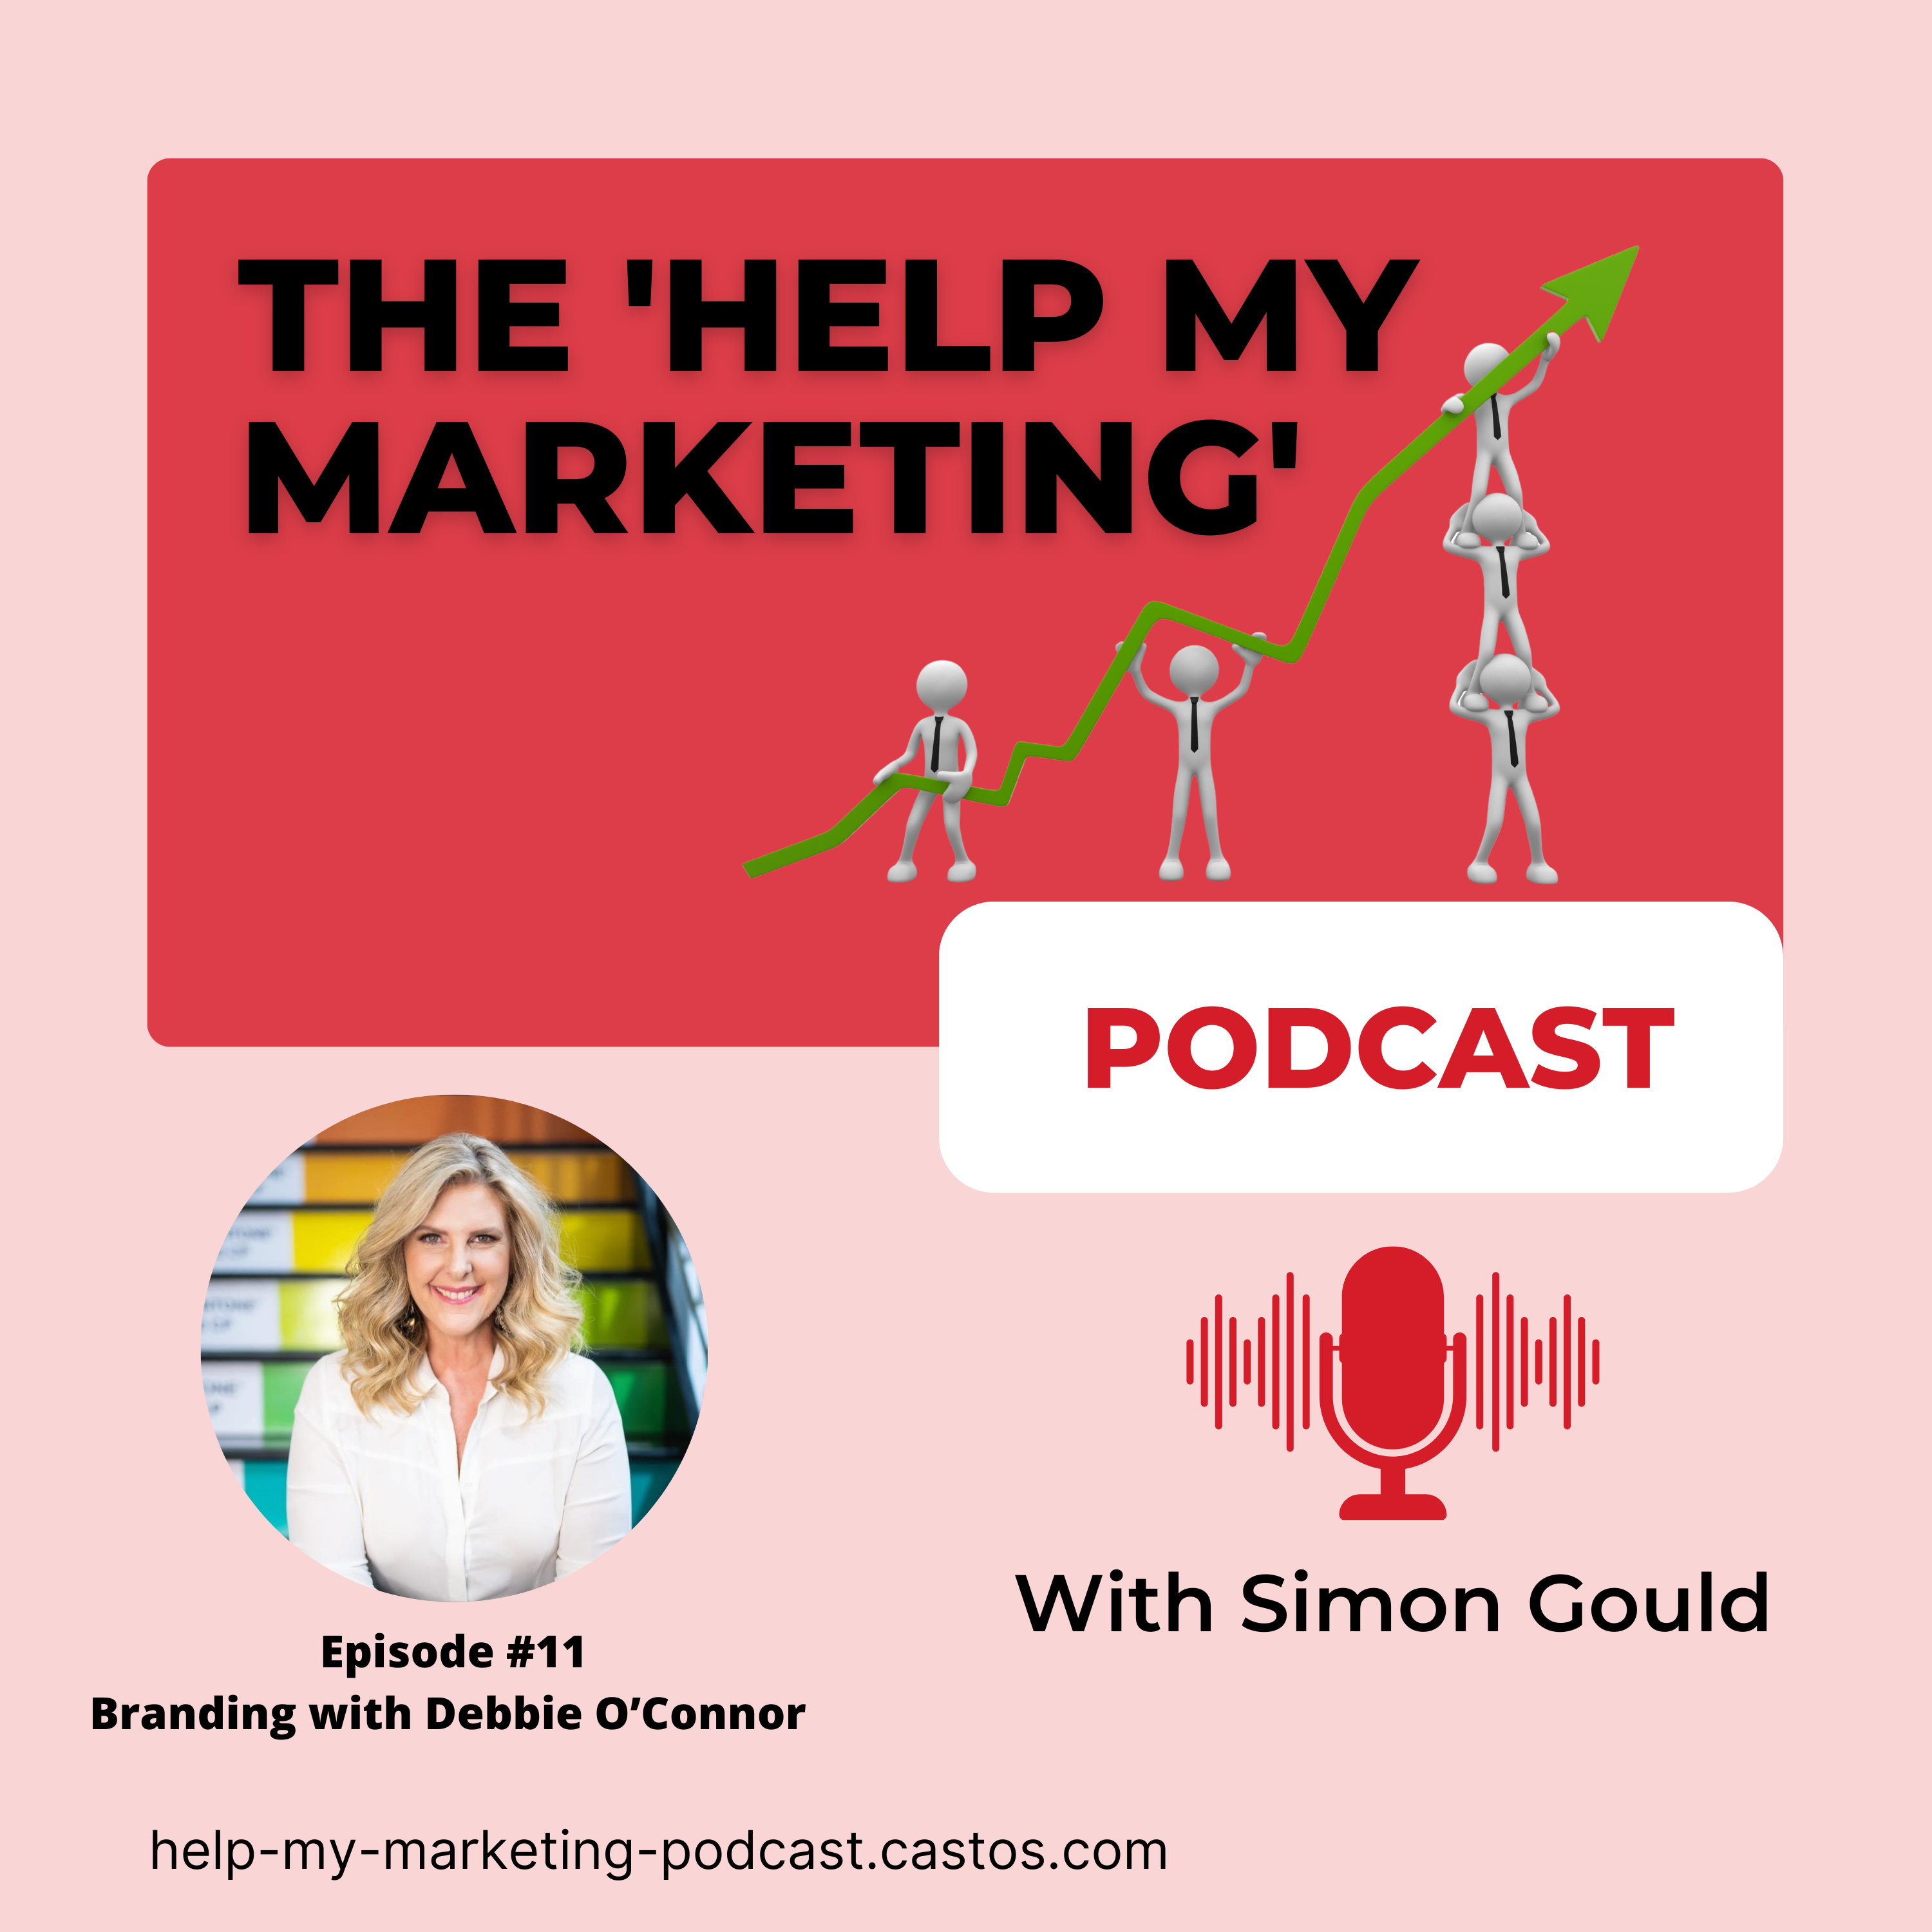 Building your brand with Debbie O'Connor